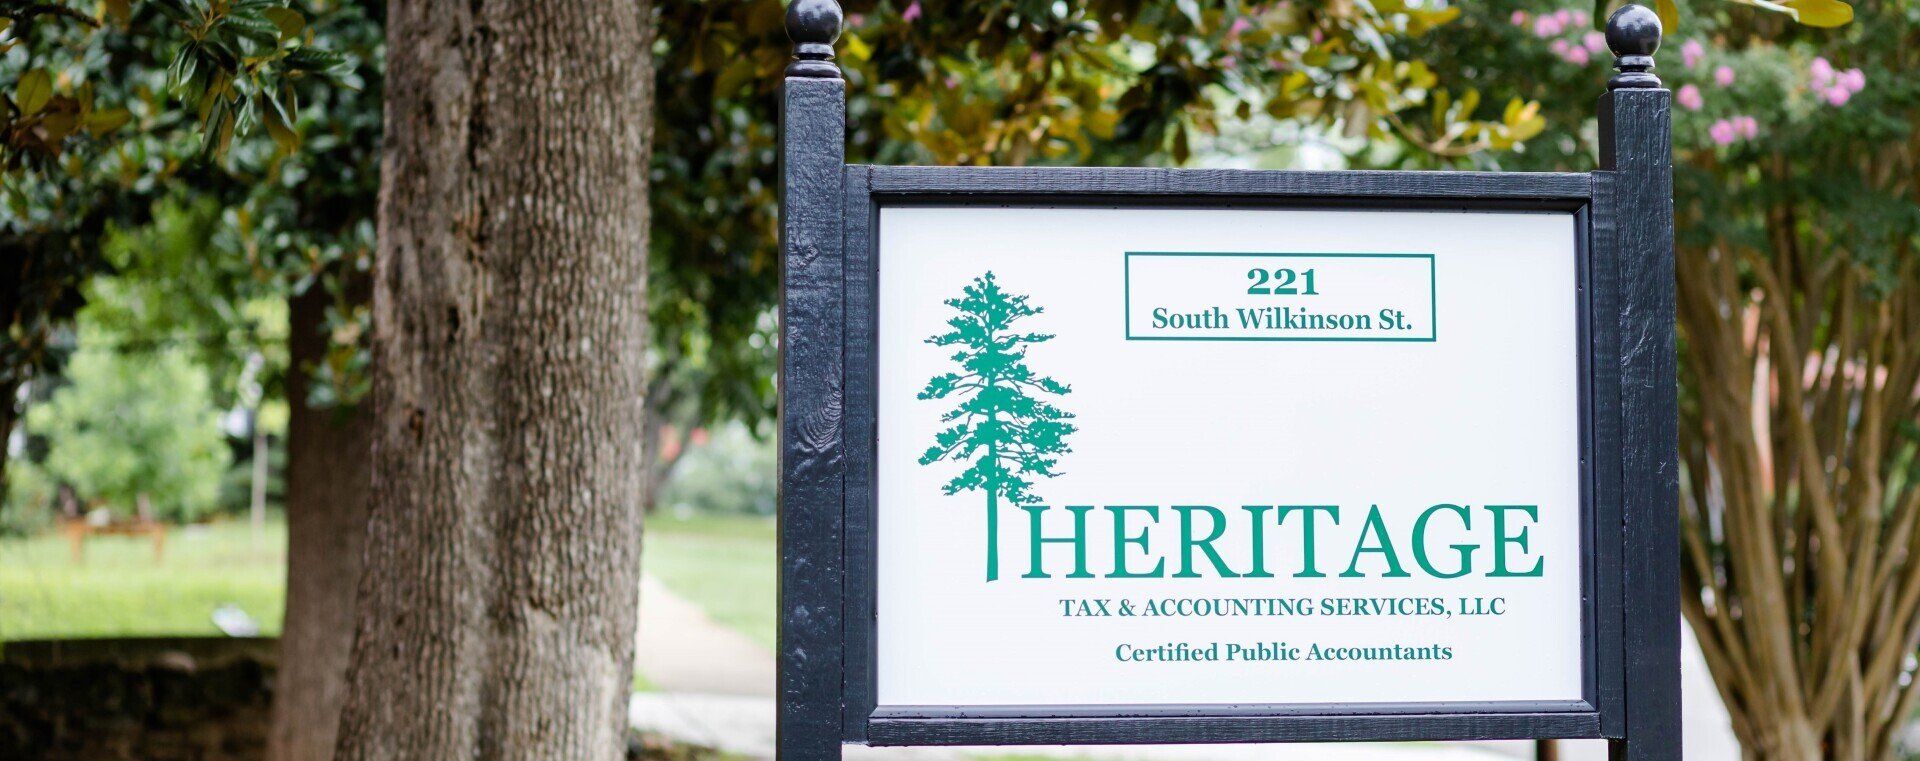 Heritage Tax & Accounting Services sign on S Wilkinson st in Milledgeville, GA